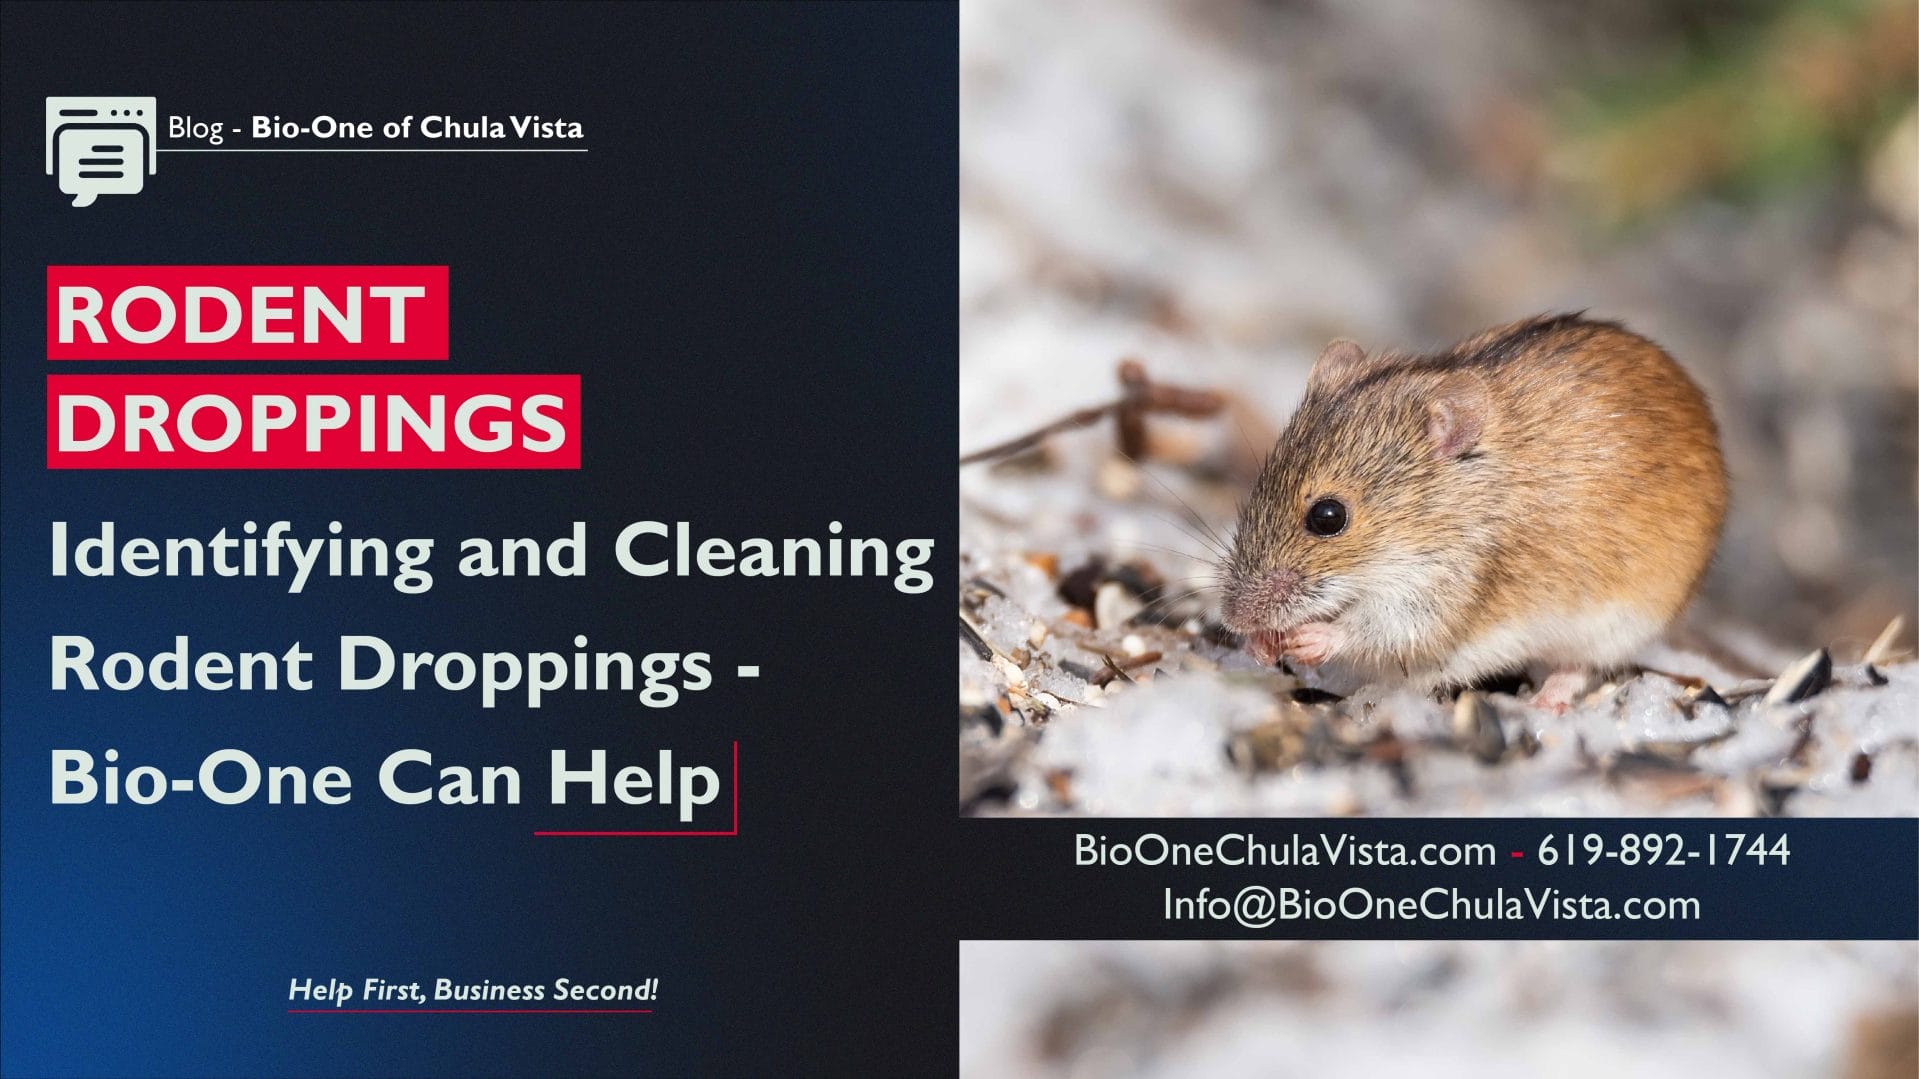 Identifying and Cleaning Rodent Droppings - Bio-One Can Help. Photo credit: @bushalex - Freepik.